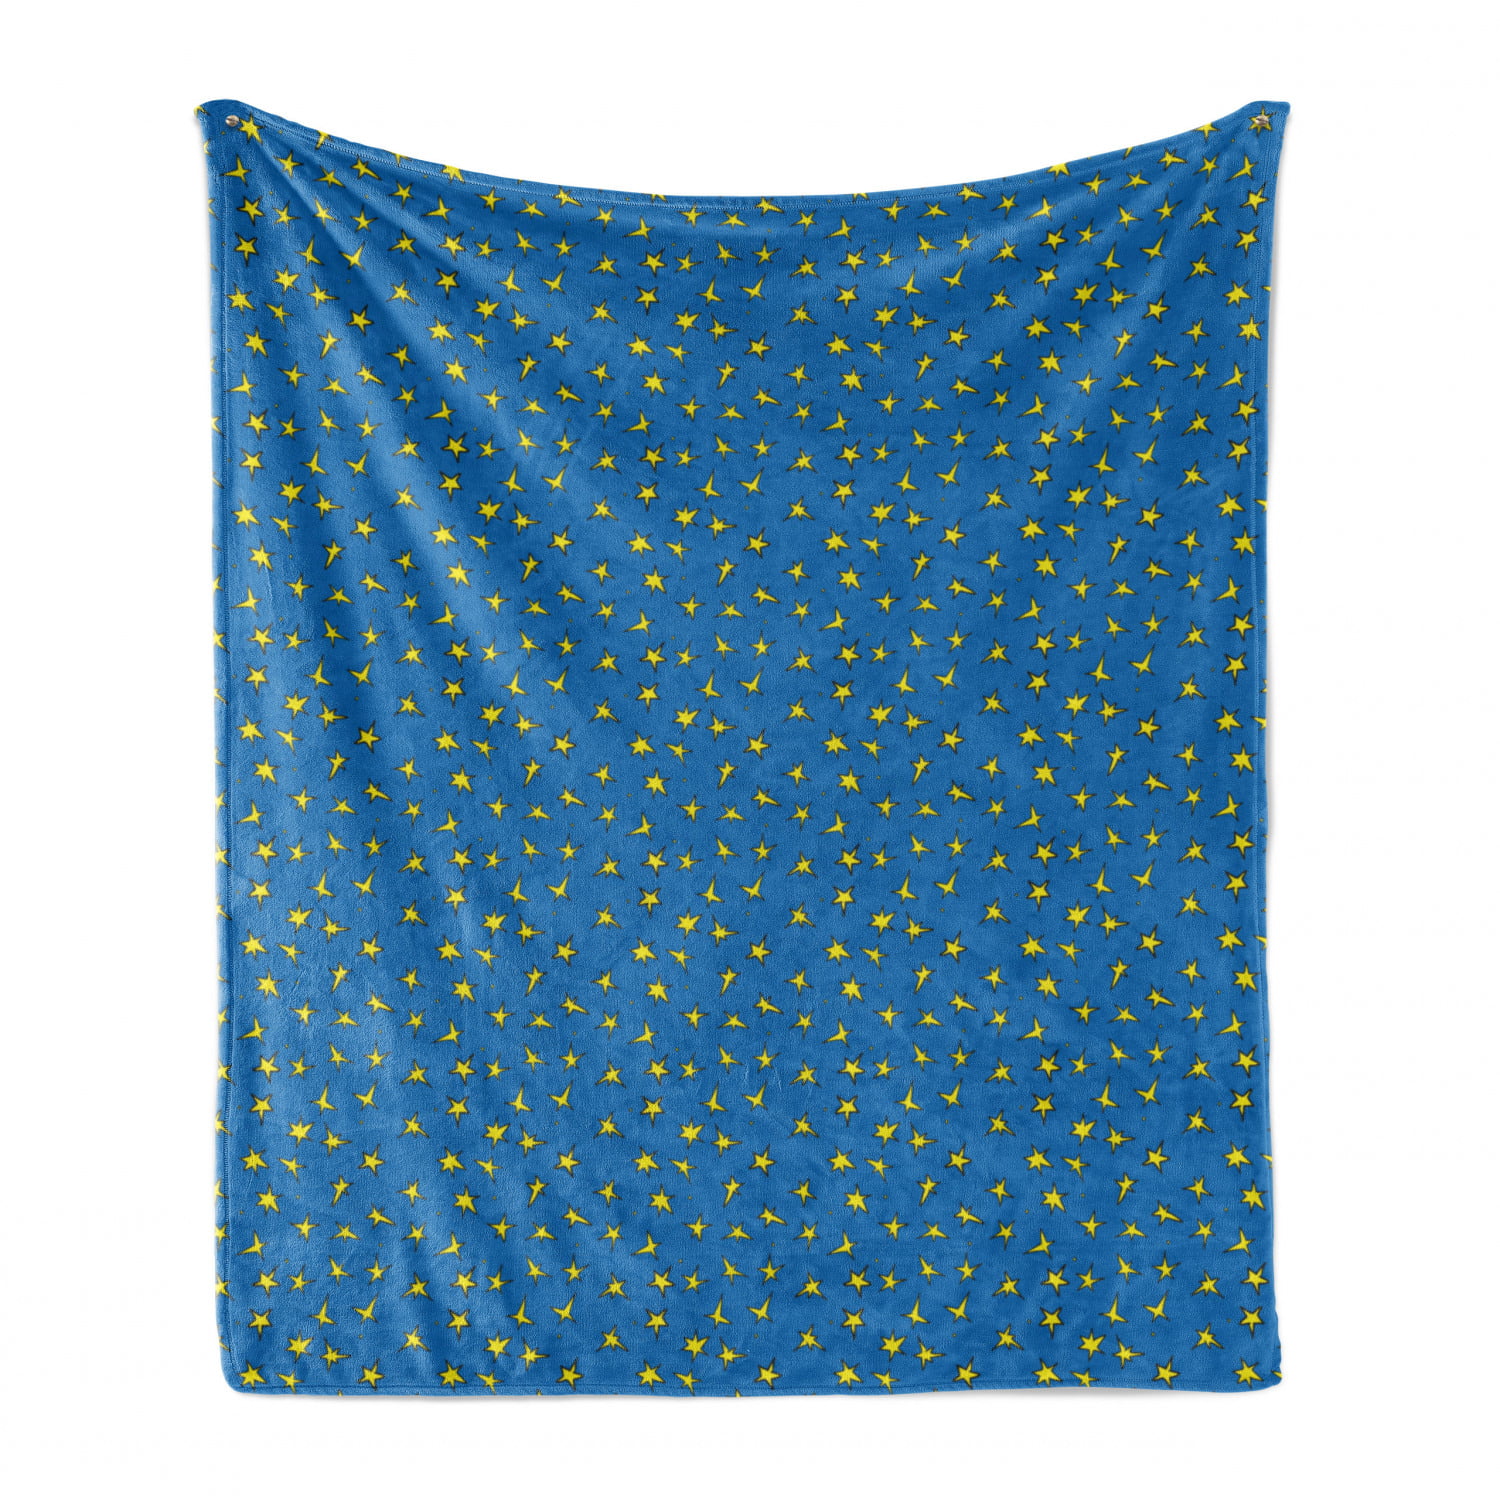 Yellow Sea Blue 60 x 80 Ambesonne Stars Soft Flannel Fleece Throw Blanket Repetitive Cool Tone Sky Elements Night Cartoon Pop Art Inspired Illustration Cozy Plush for Indoor and Outdoor Use 